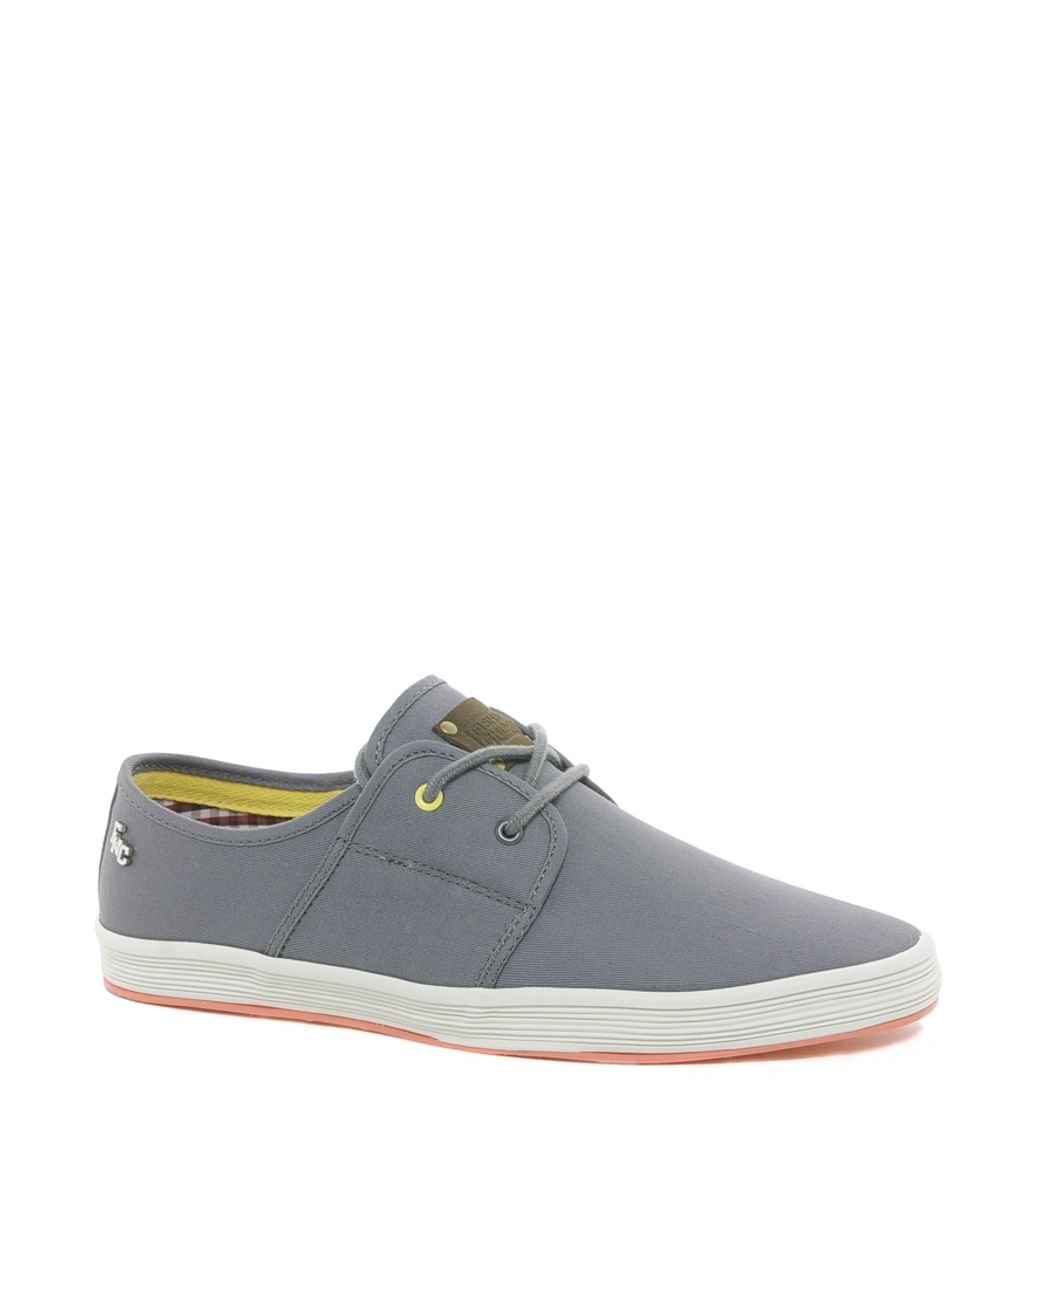 Fish 'n' Chips Fish & Chips By Base London Sneakers in Gray for Men | Lyst